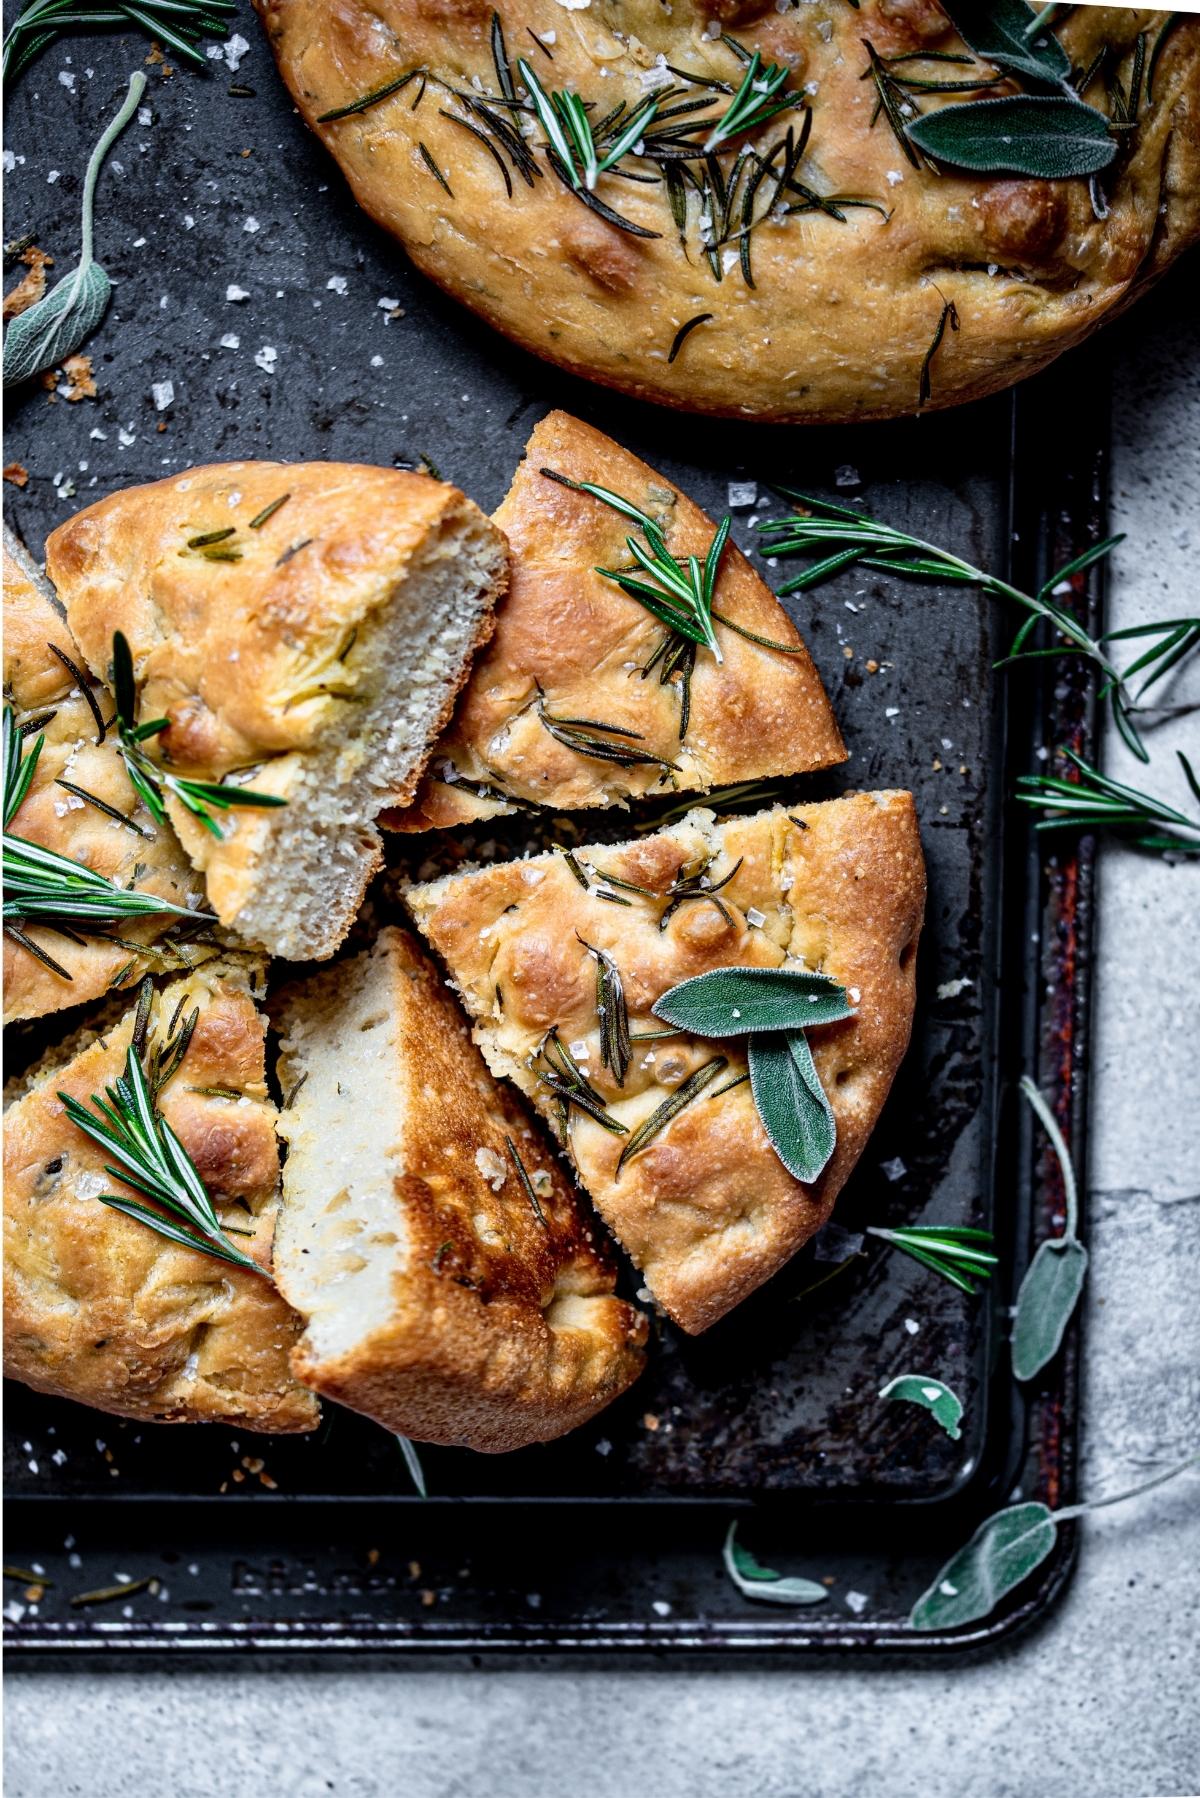 Sliced focaccia bread on a upside down baking sheet and sprinkled with sage.